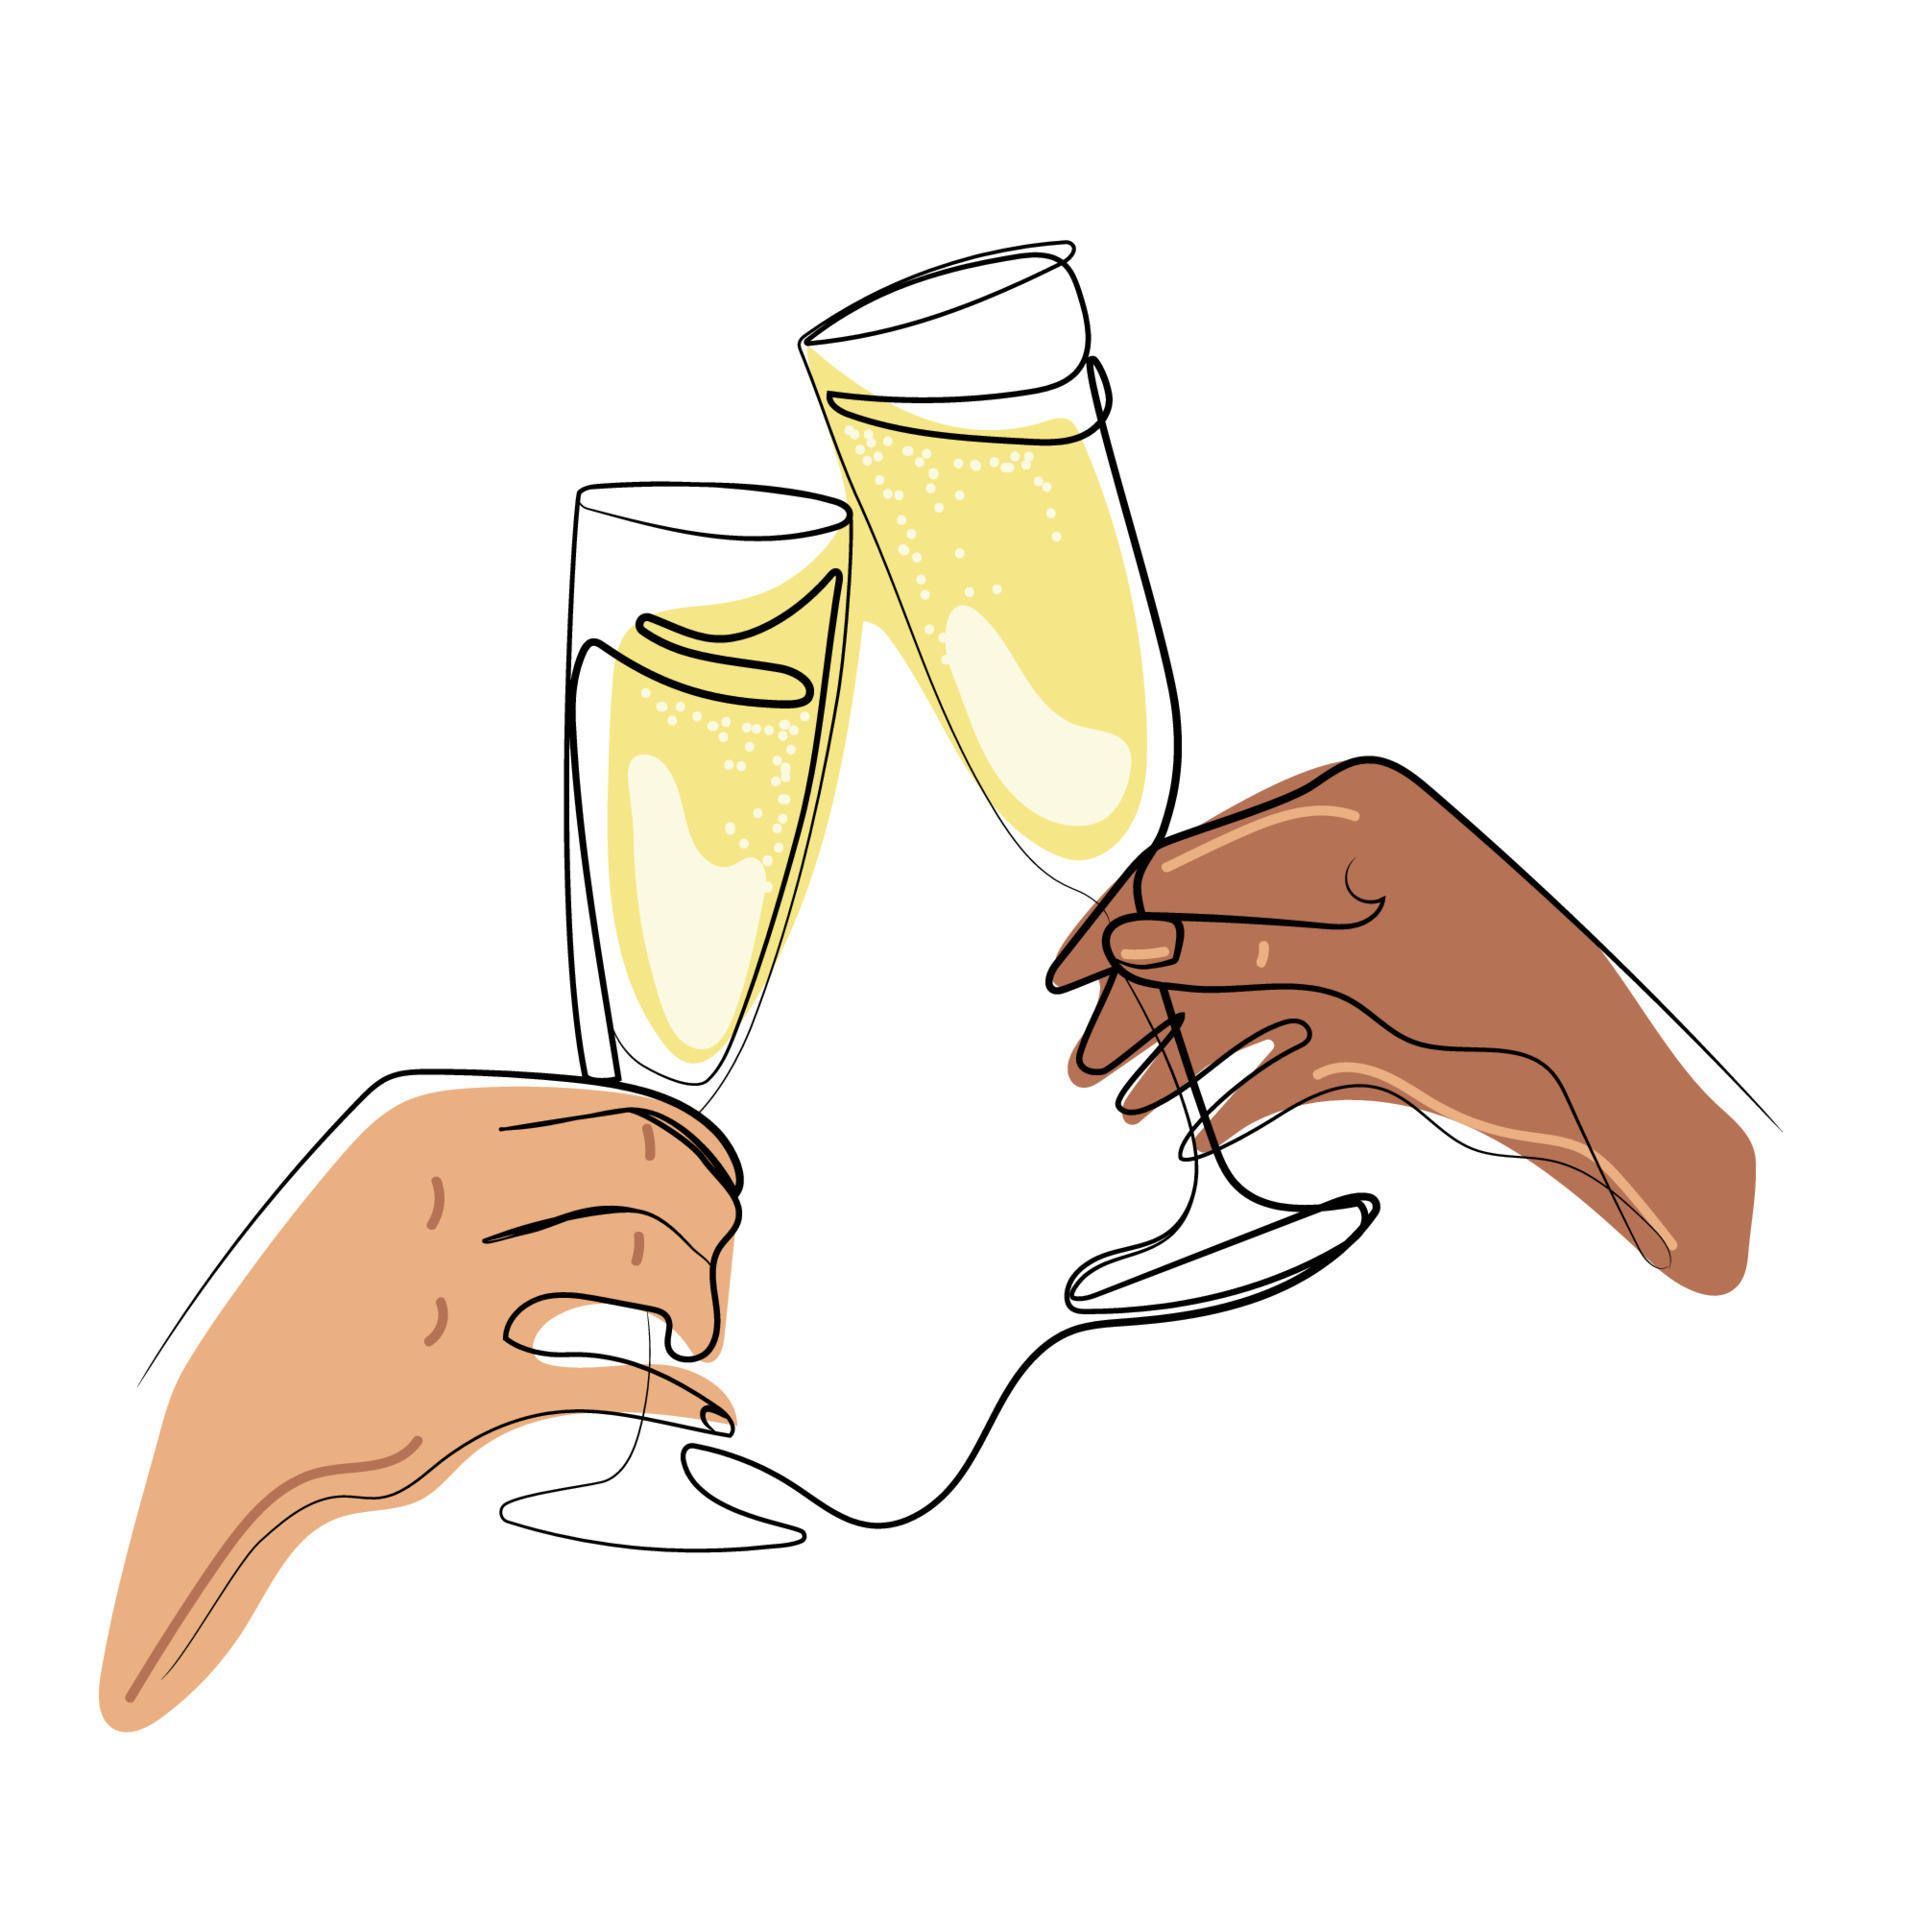 One Line Champagne Glasses Clinktwo Hands Cheering With Glasses Of Wine Vector Illustration